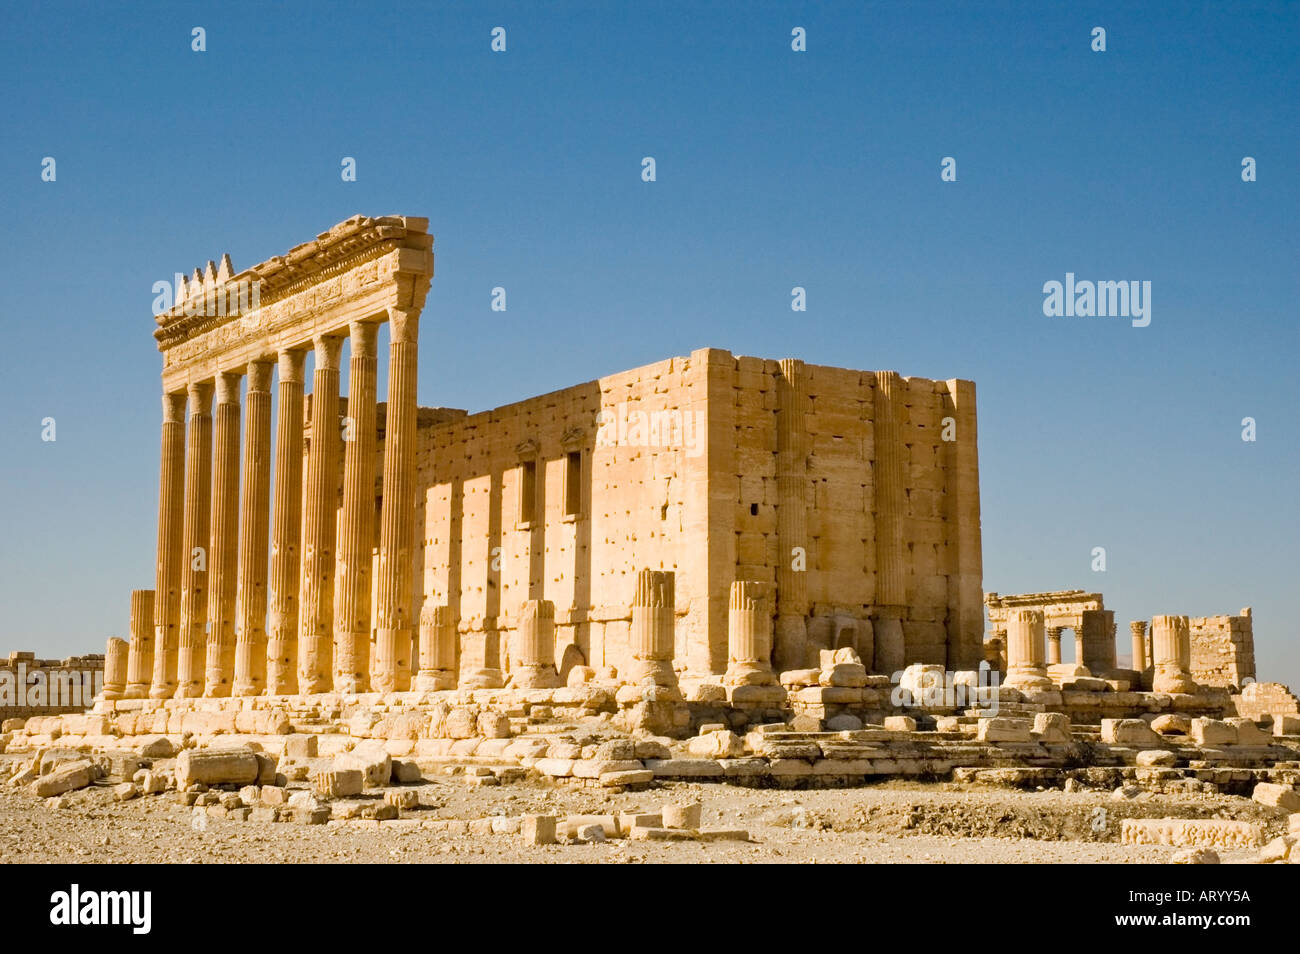 Central cella, Temple of Bel, Bal, amongst Ruins ancient Tadmor, Palmyra, Central Syria, Middle East. DSC 5937 Stock Photo